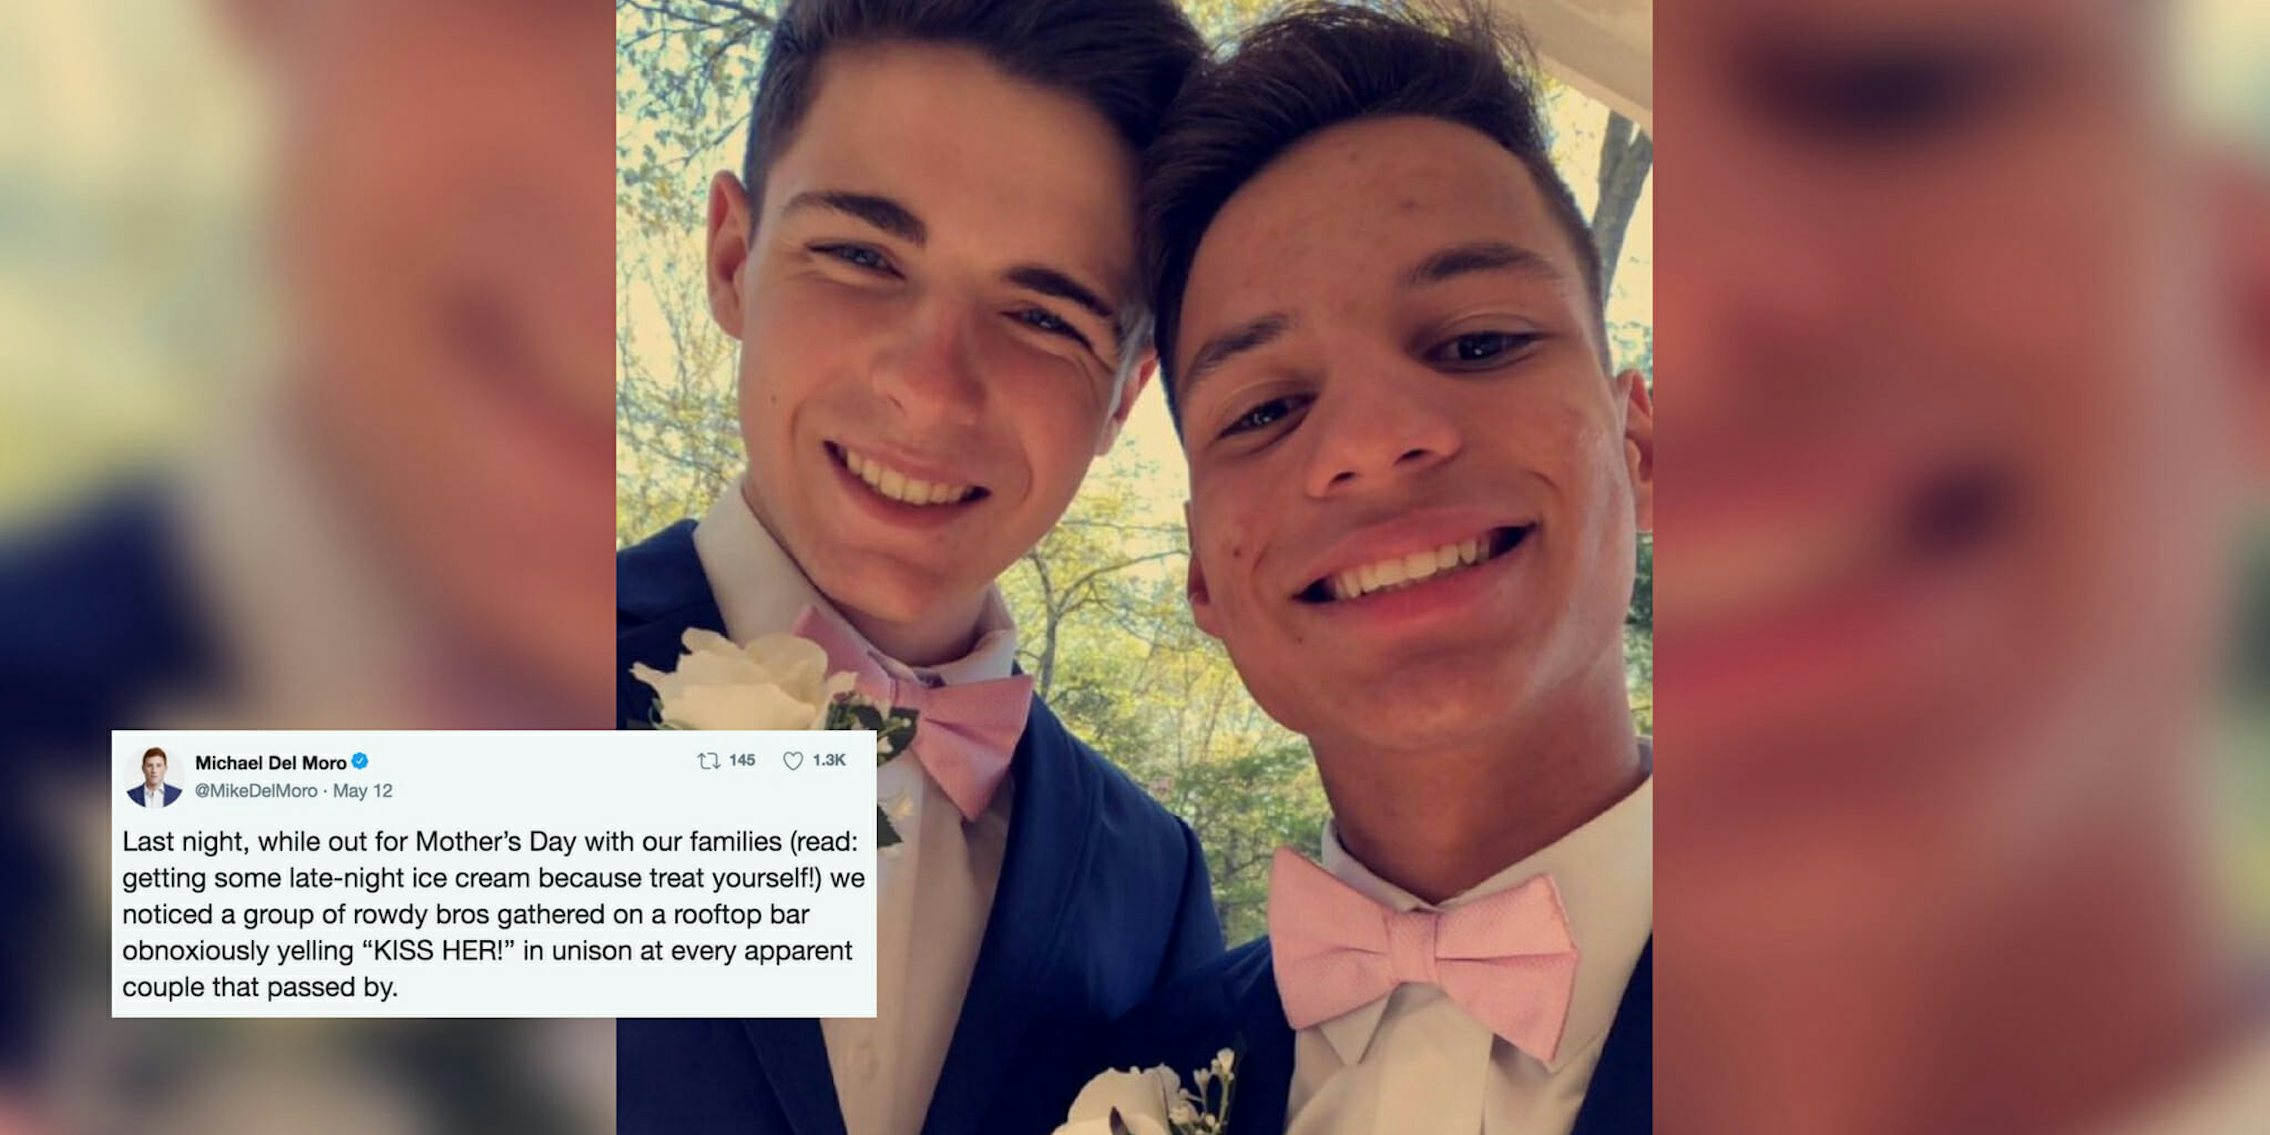 A gay prom couple who onlookers feared would be harassed were openly embraced by strangers in Seaside Heights, New Jersey.